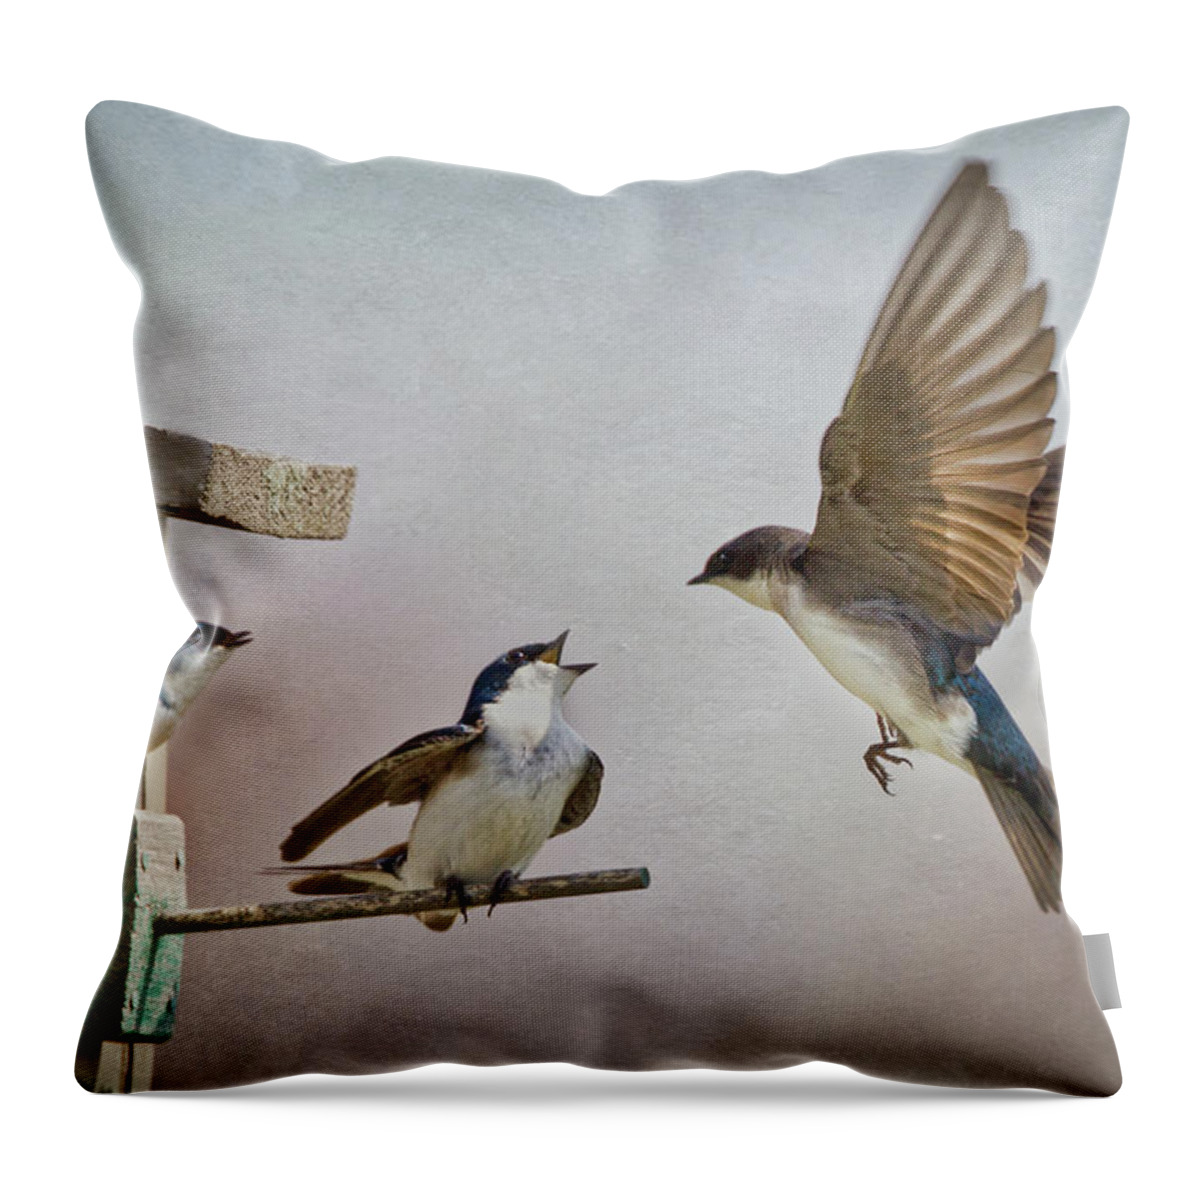 Animal Themes Throw Pillow featuring the photograph Swallows At Birdhouse by Betty Wiley